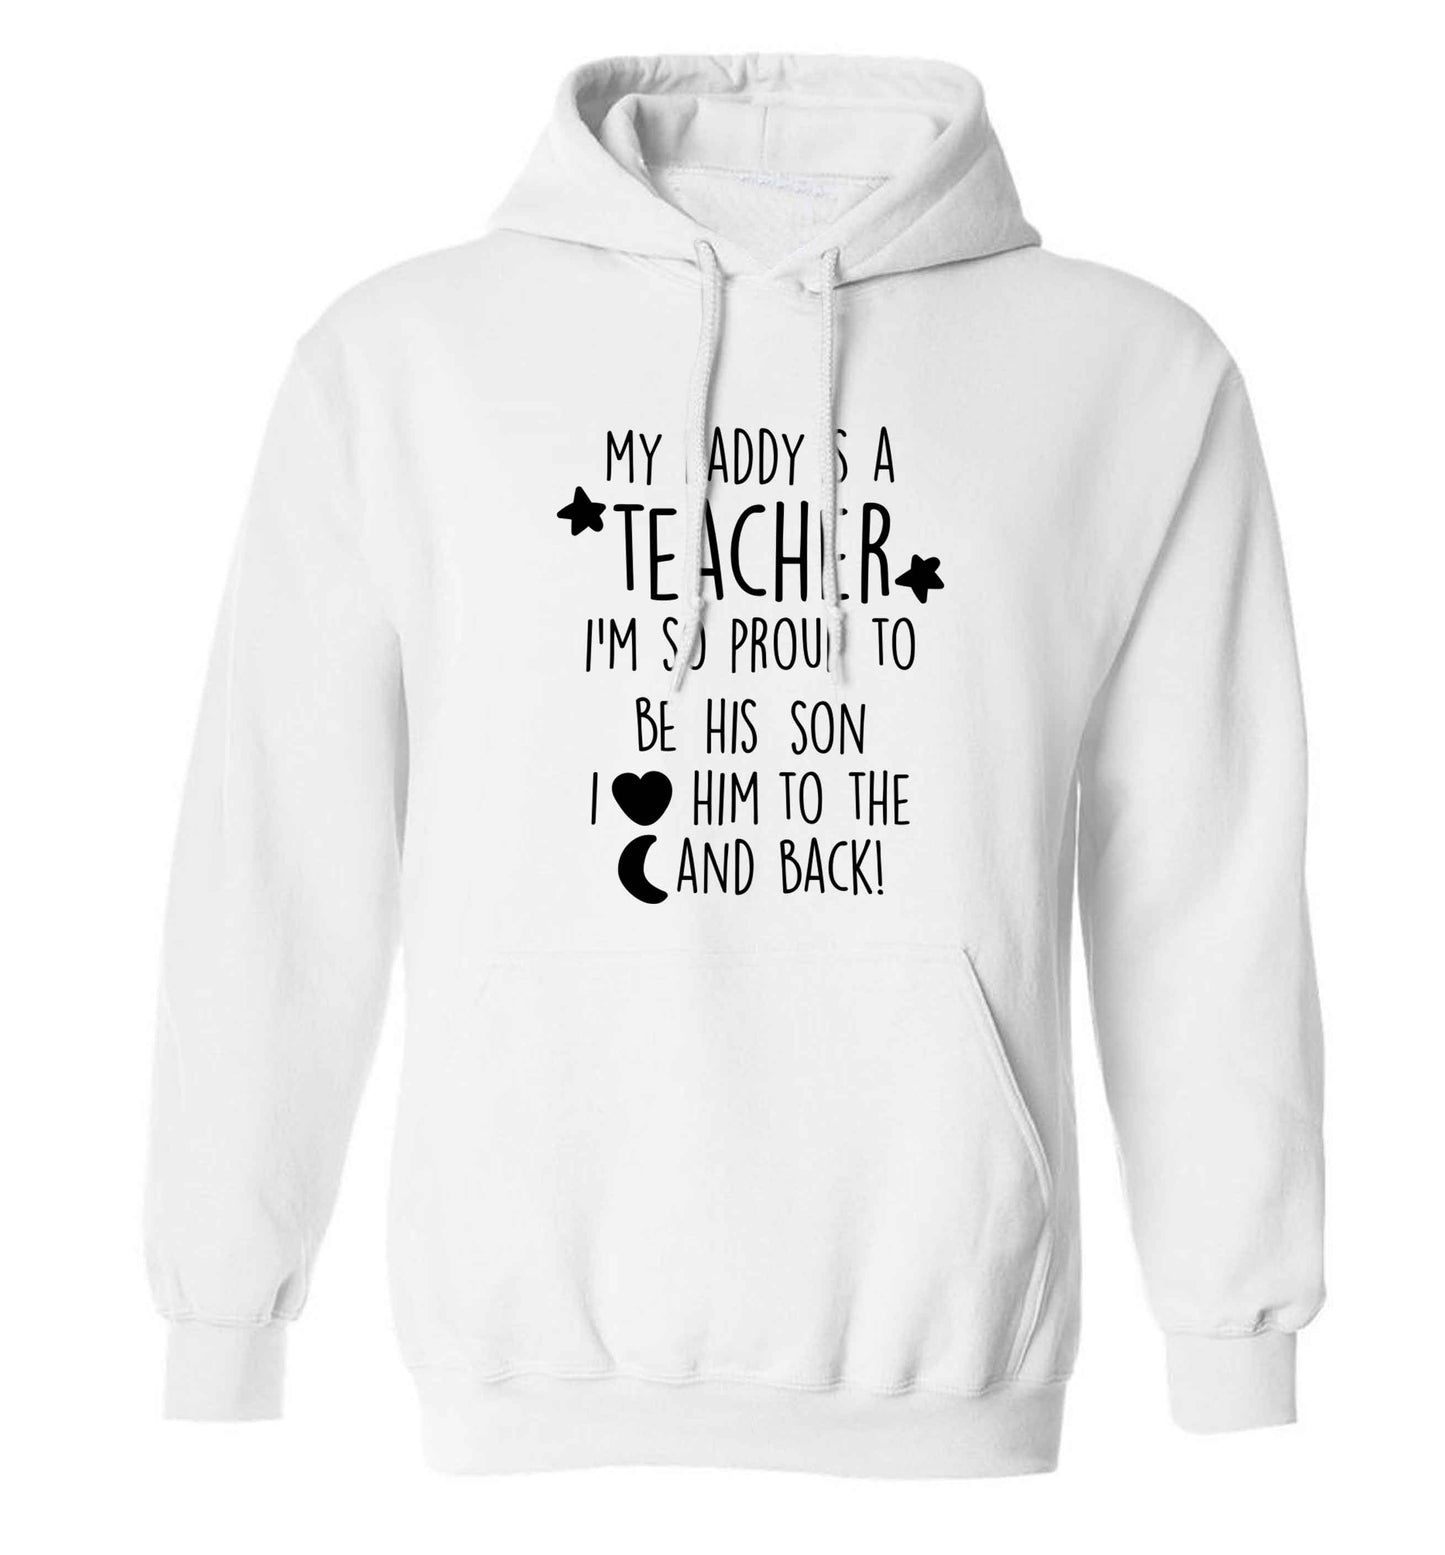 My daddy is a teacher I'm so proud to be his son I love her to the moon and back adults unisex white hoodie 2XL